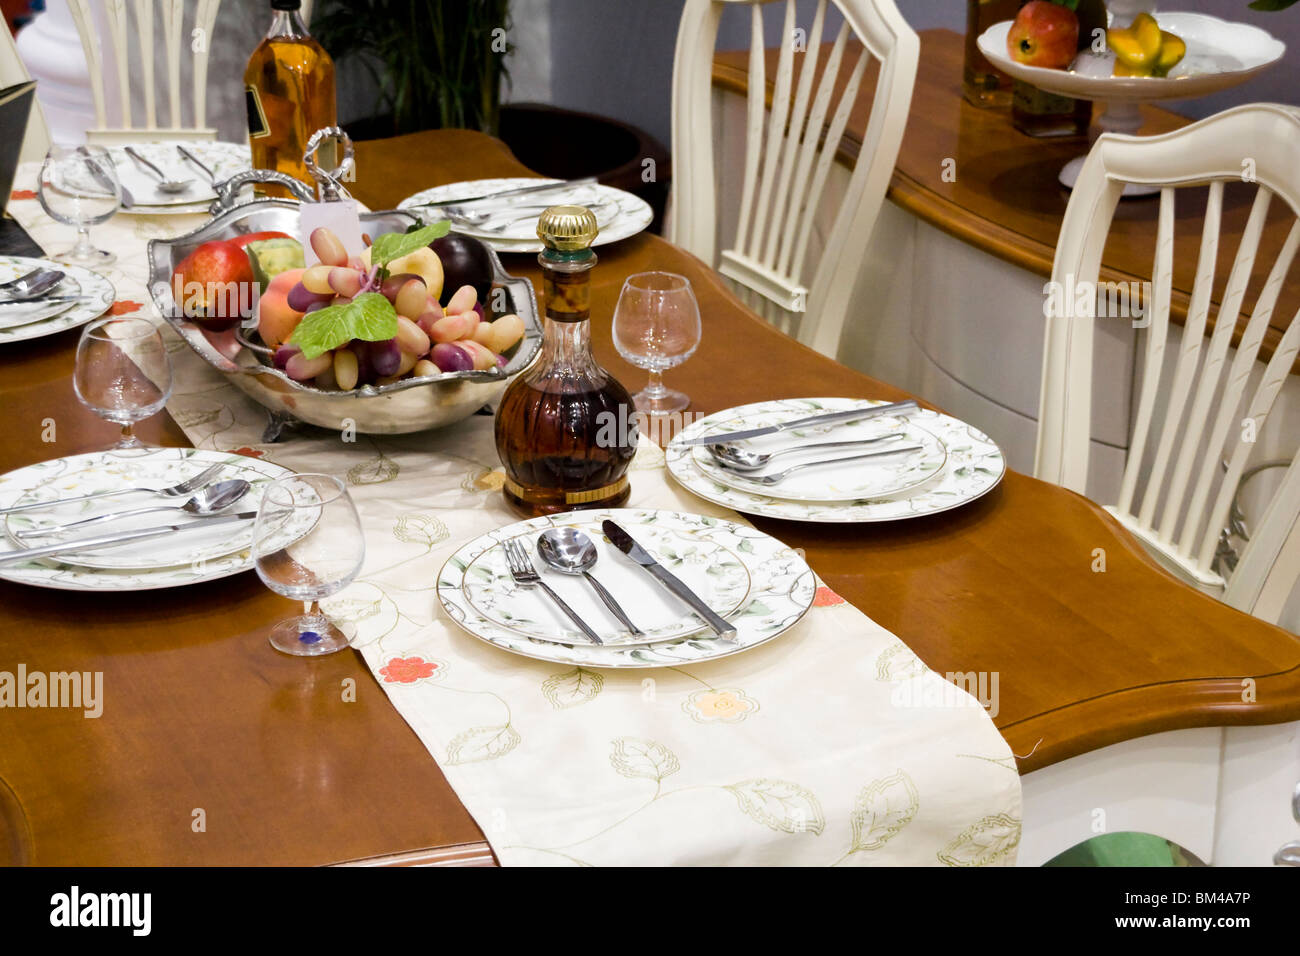 Dining table in a dining room Stock Photo